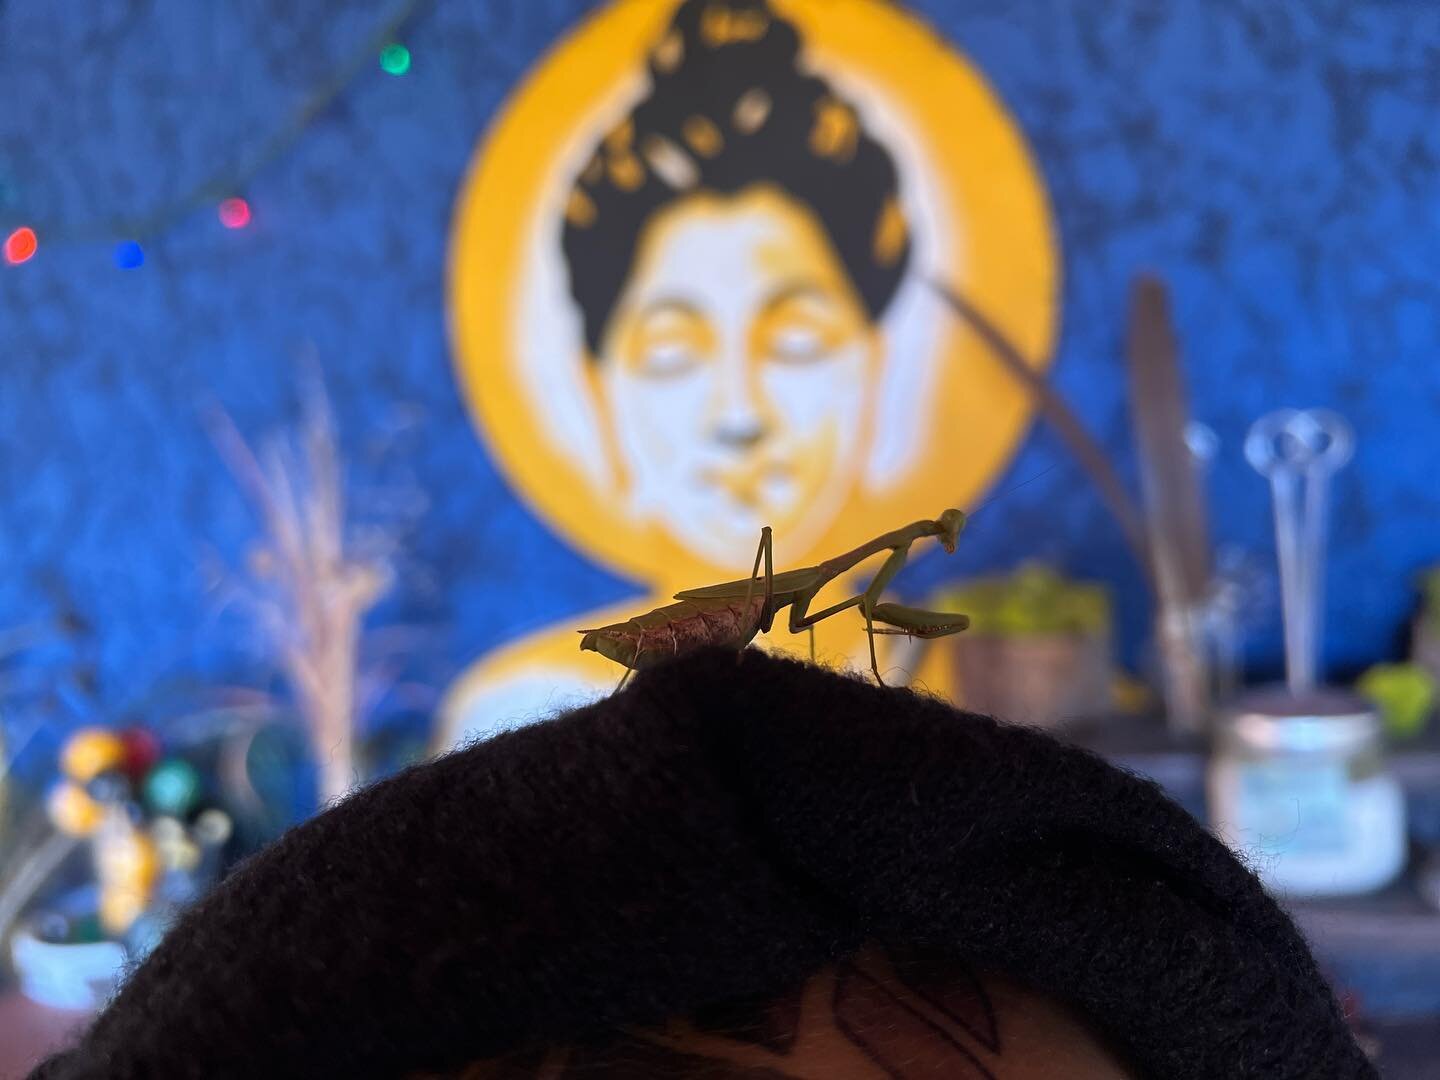 Always grateful for a #prayingmantis in the #meditation space 🙏